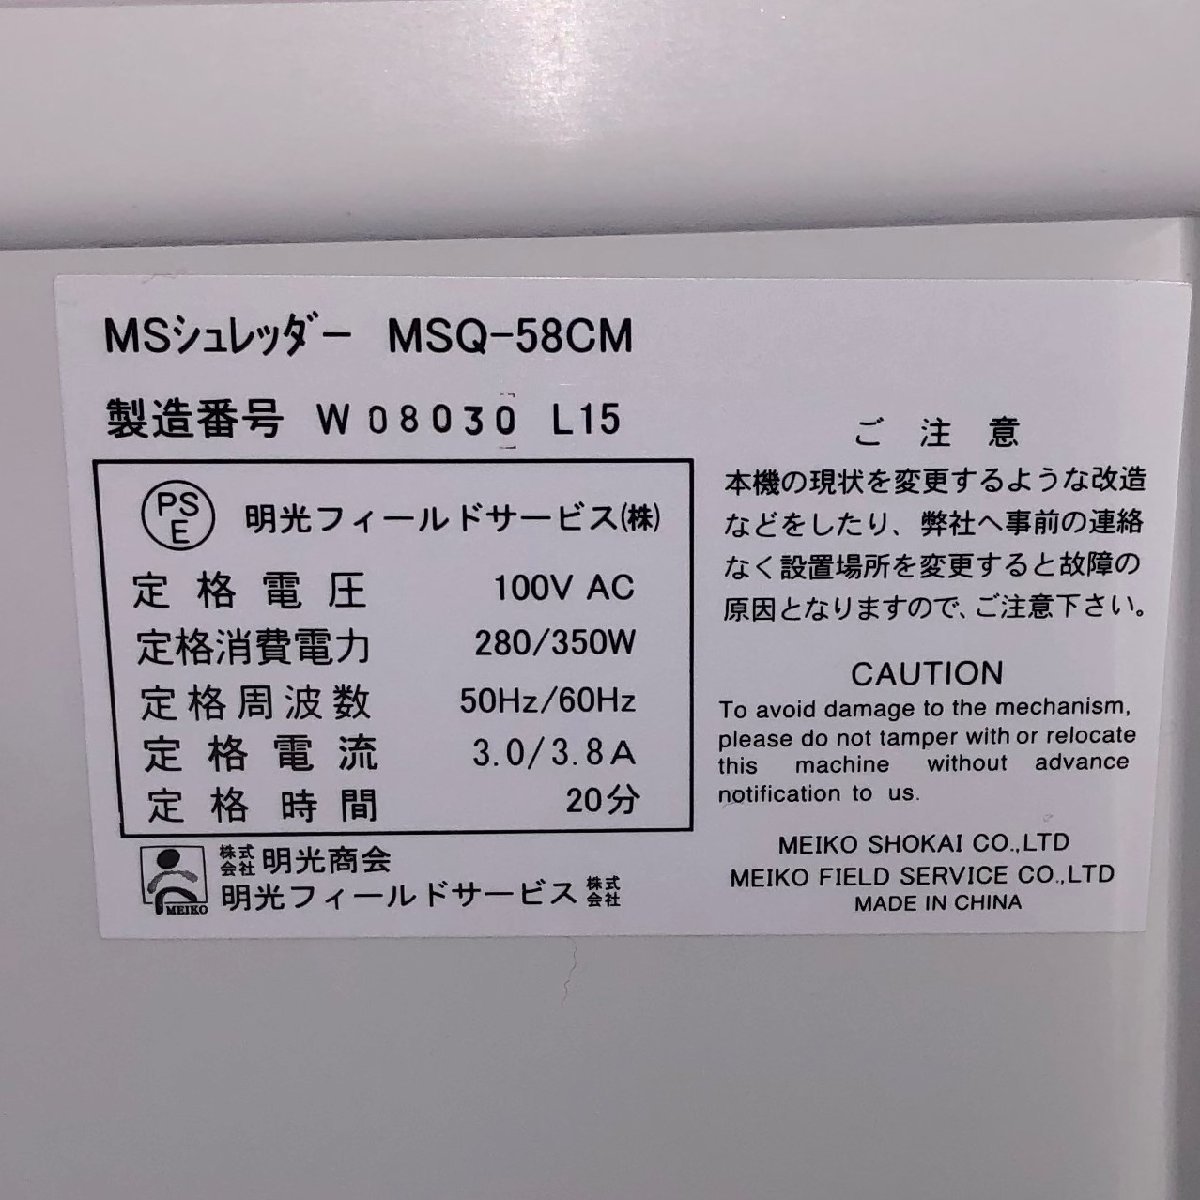 **No.8 free shipping * Akira light association MS shredder MSQ-58CM A4 size CD cutting possible one cut Cross operation excellent / with defect **